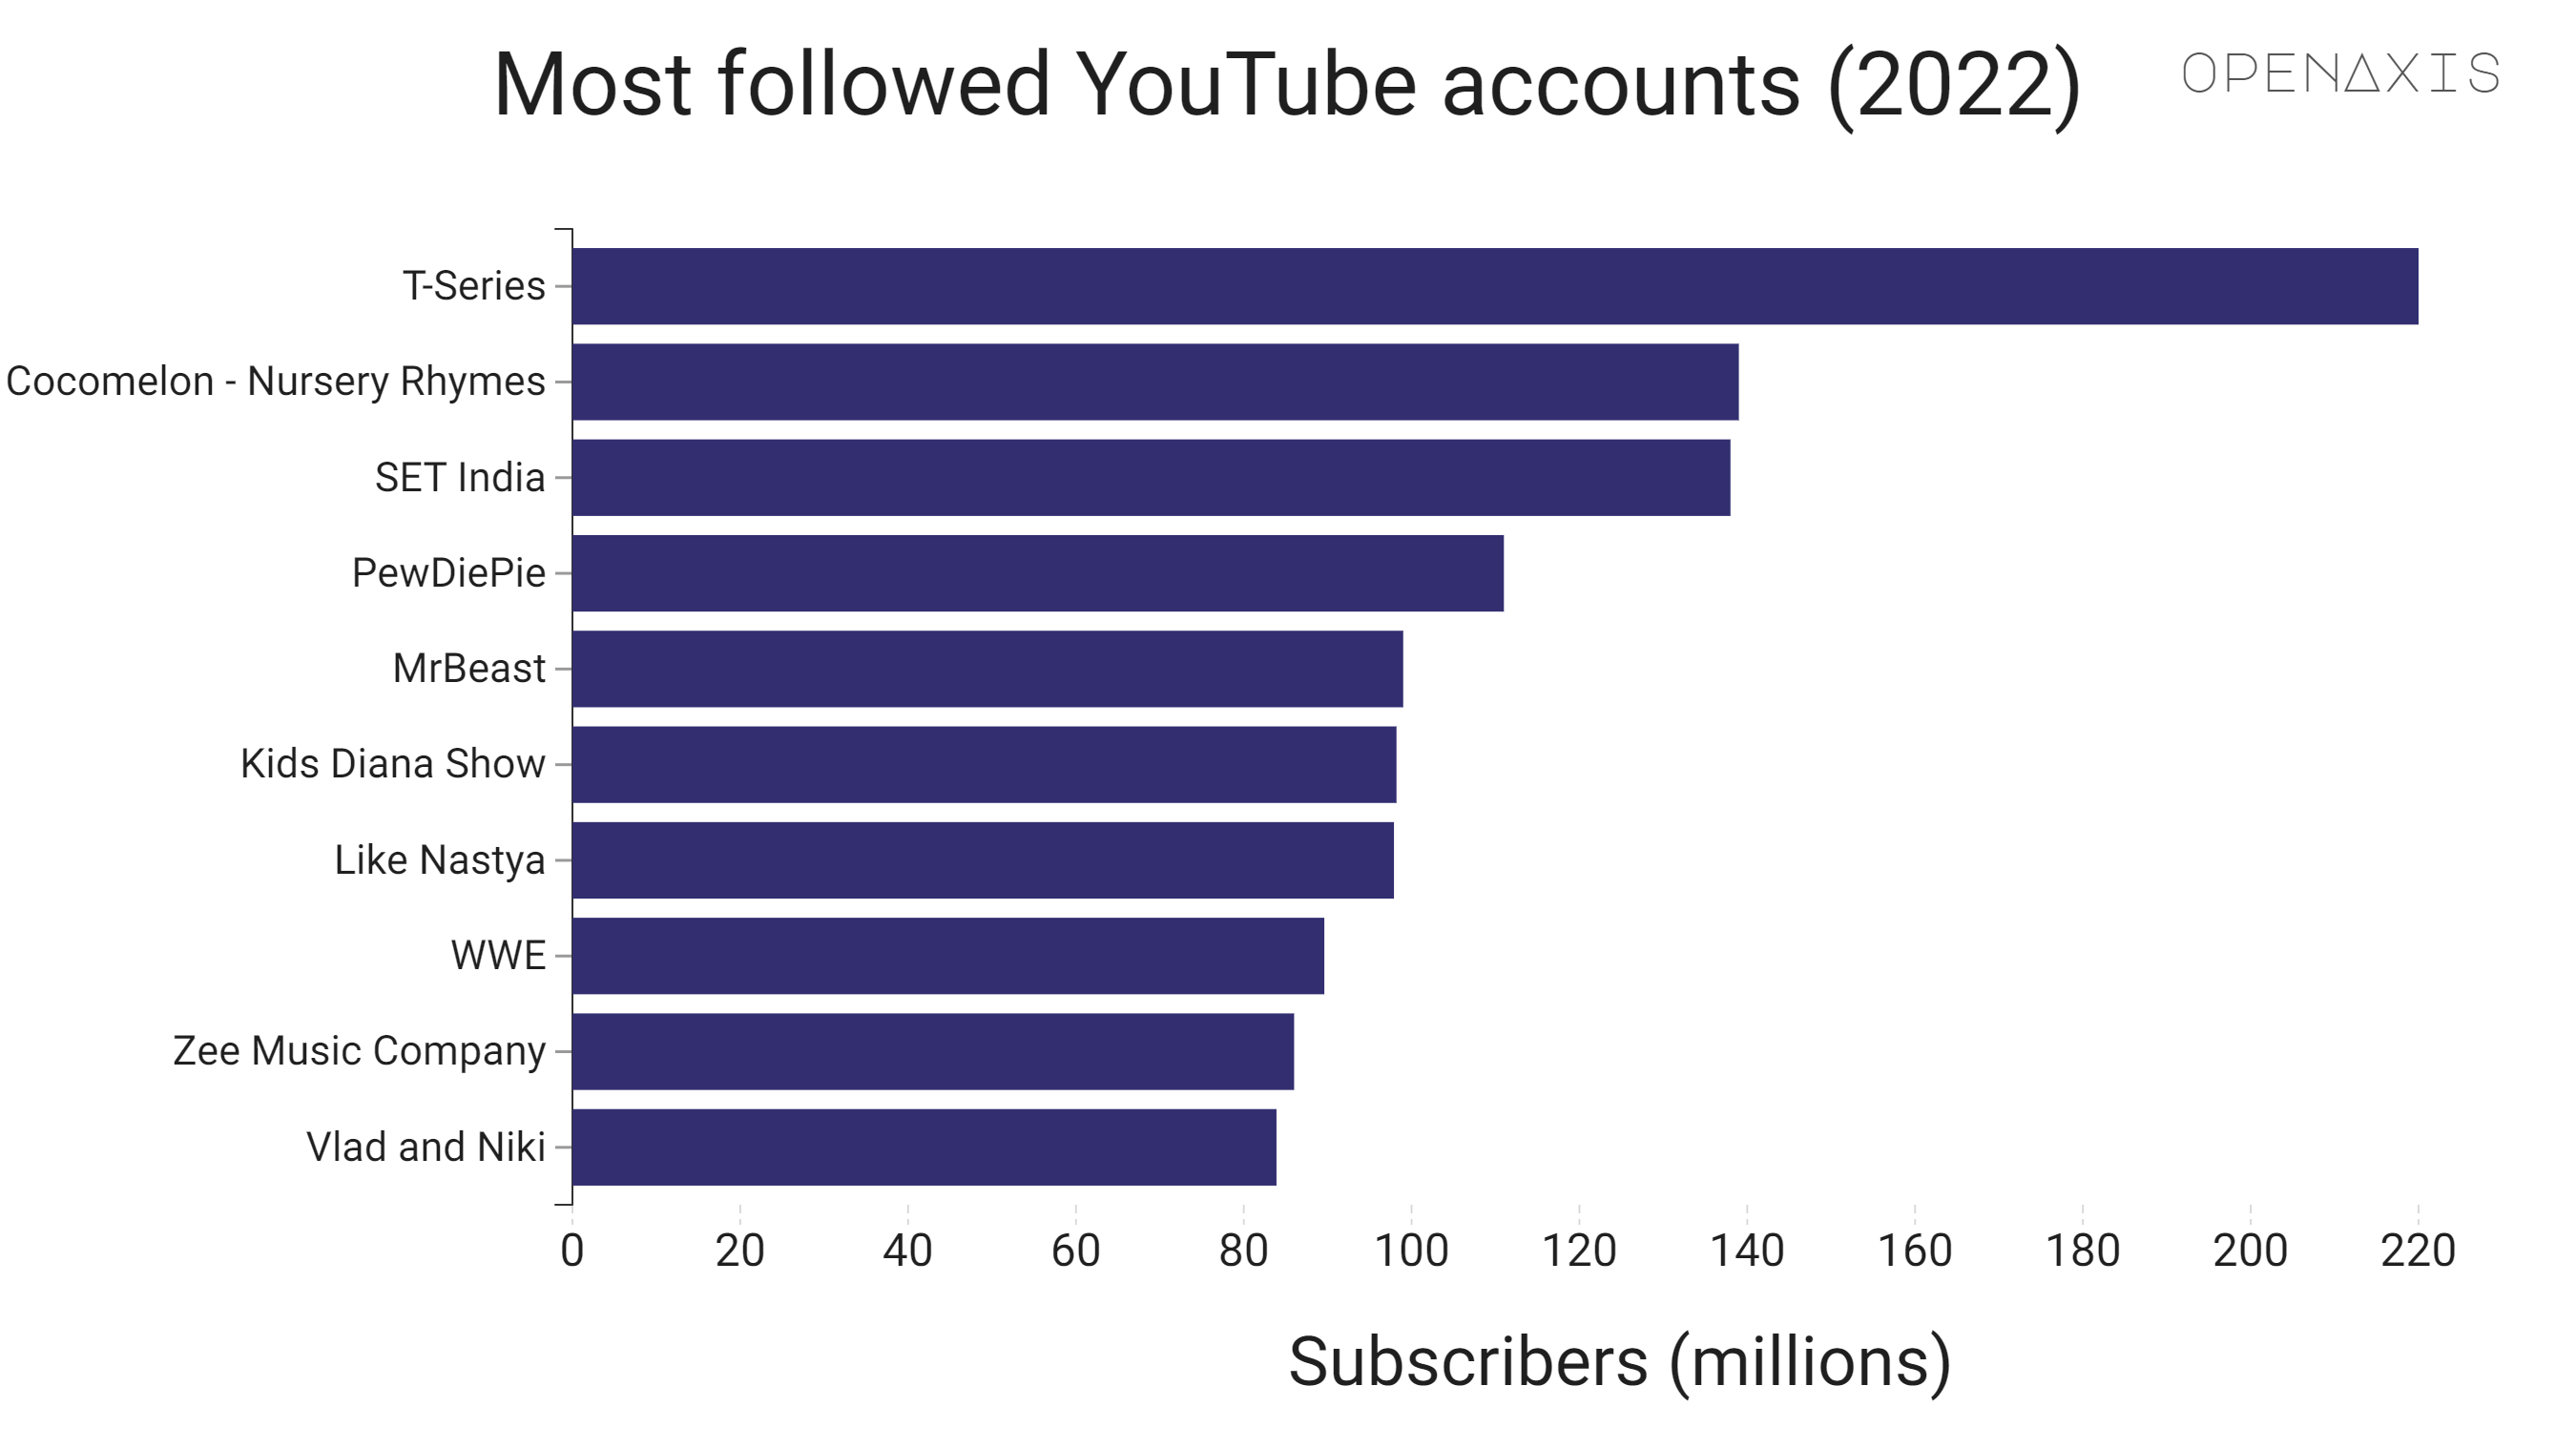 "Most followed YouTube accounts (2022)"